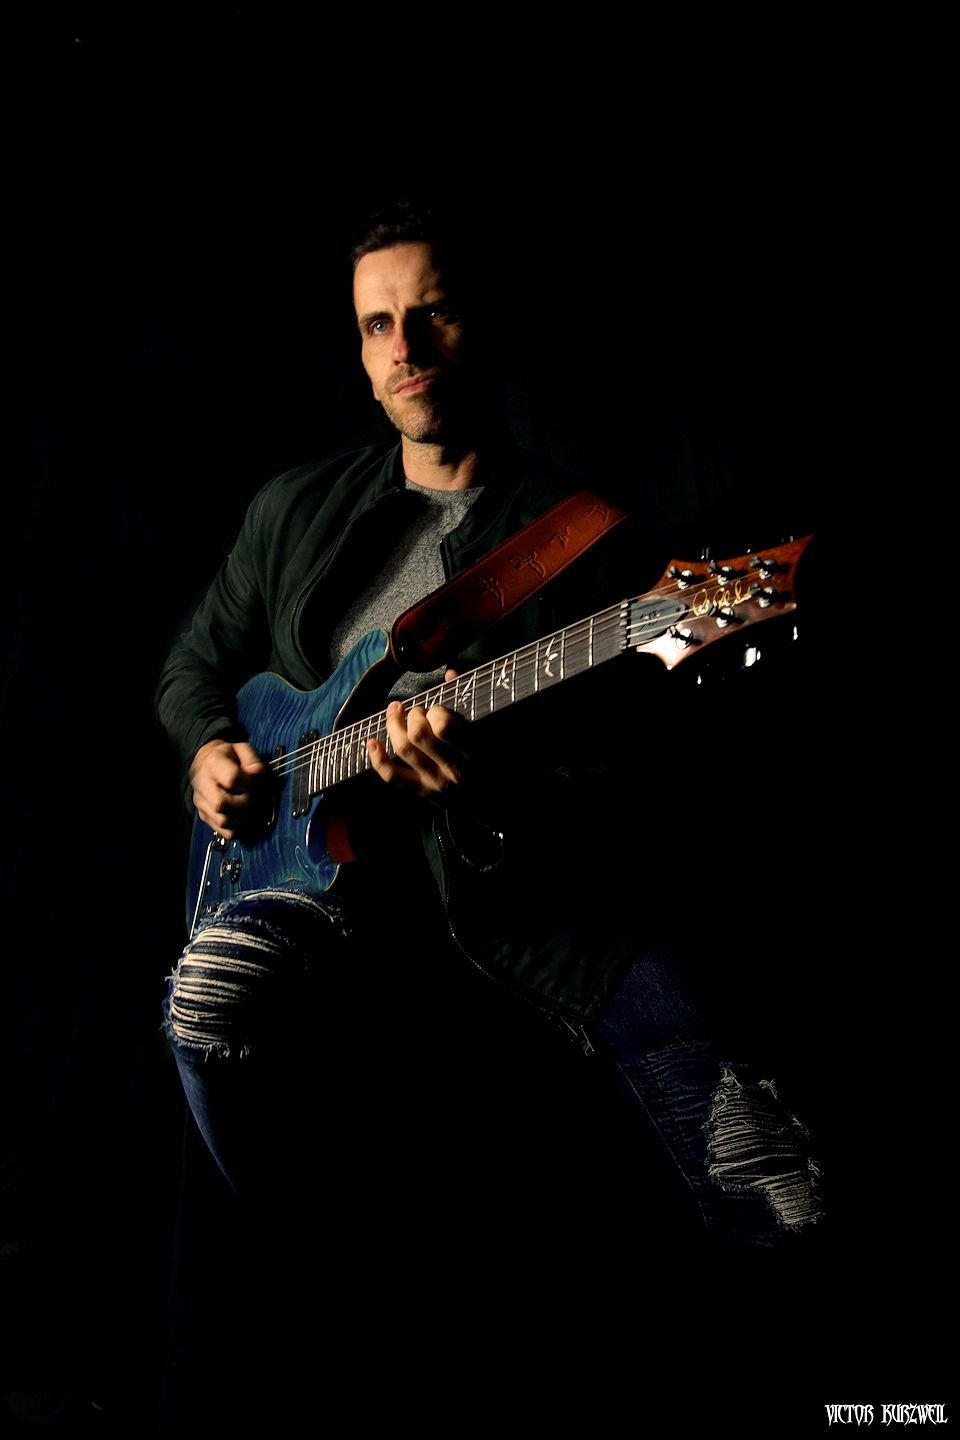 James Roberts with Guitar on black